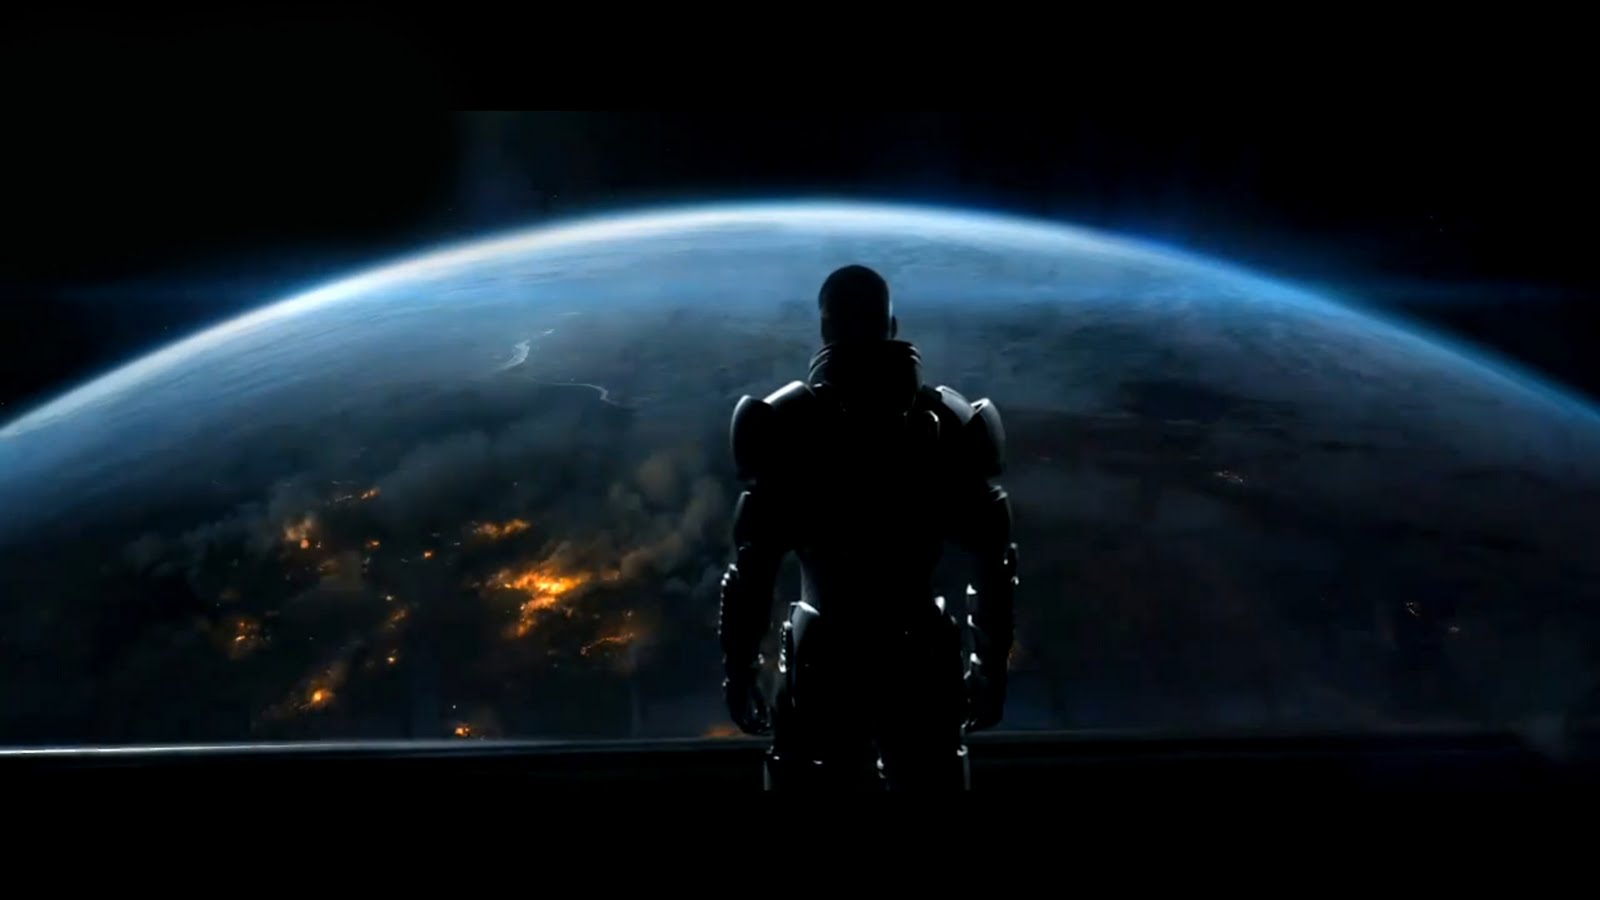 Mass Effect Legendary Edition DLC List: What's included? - GameRevolution